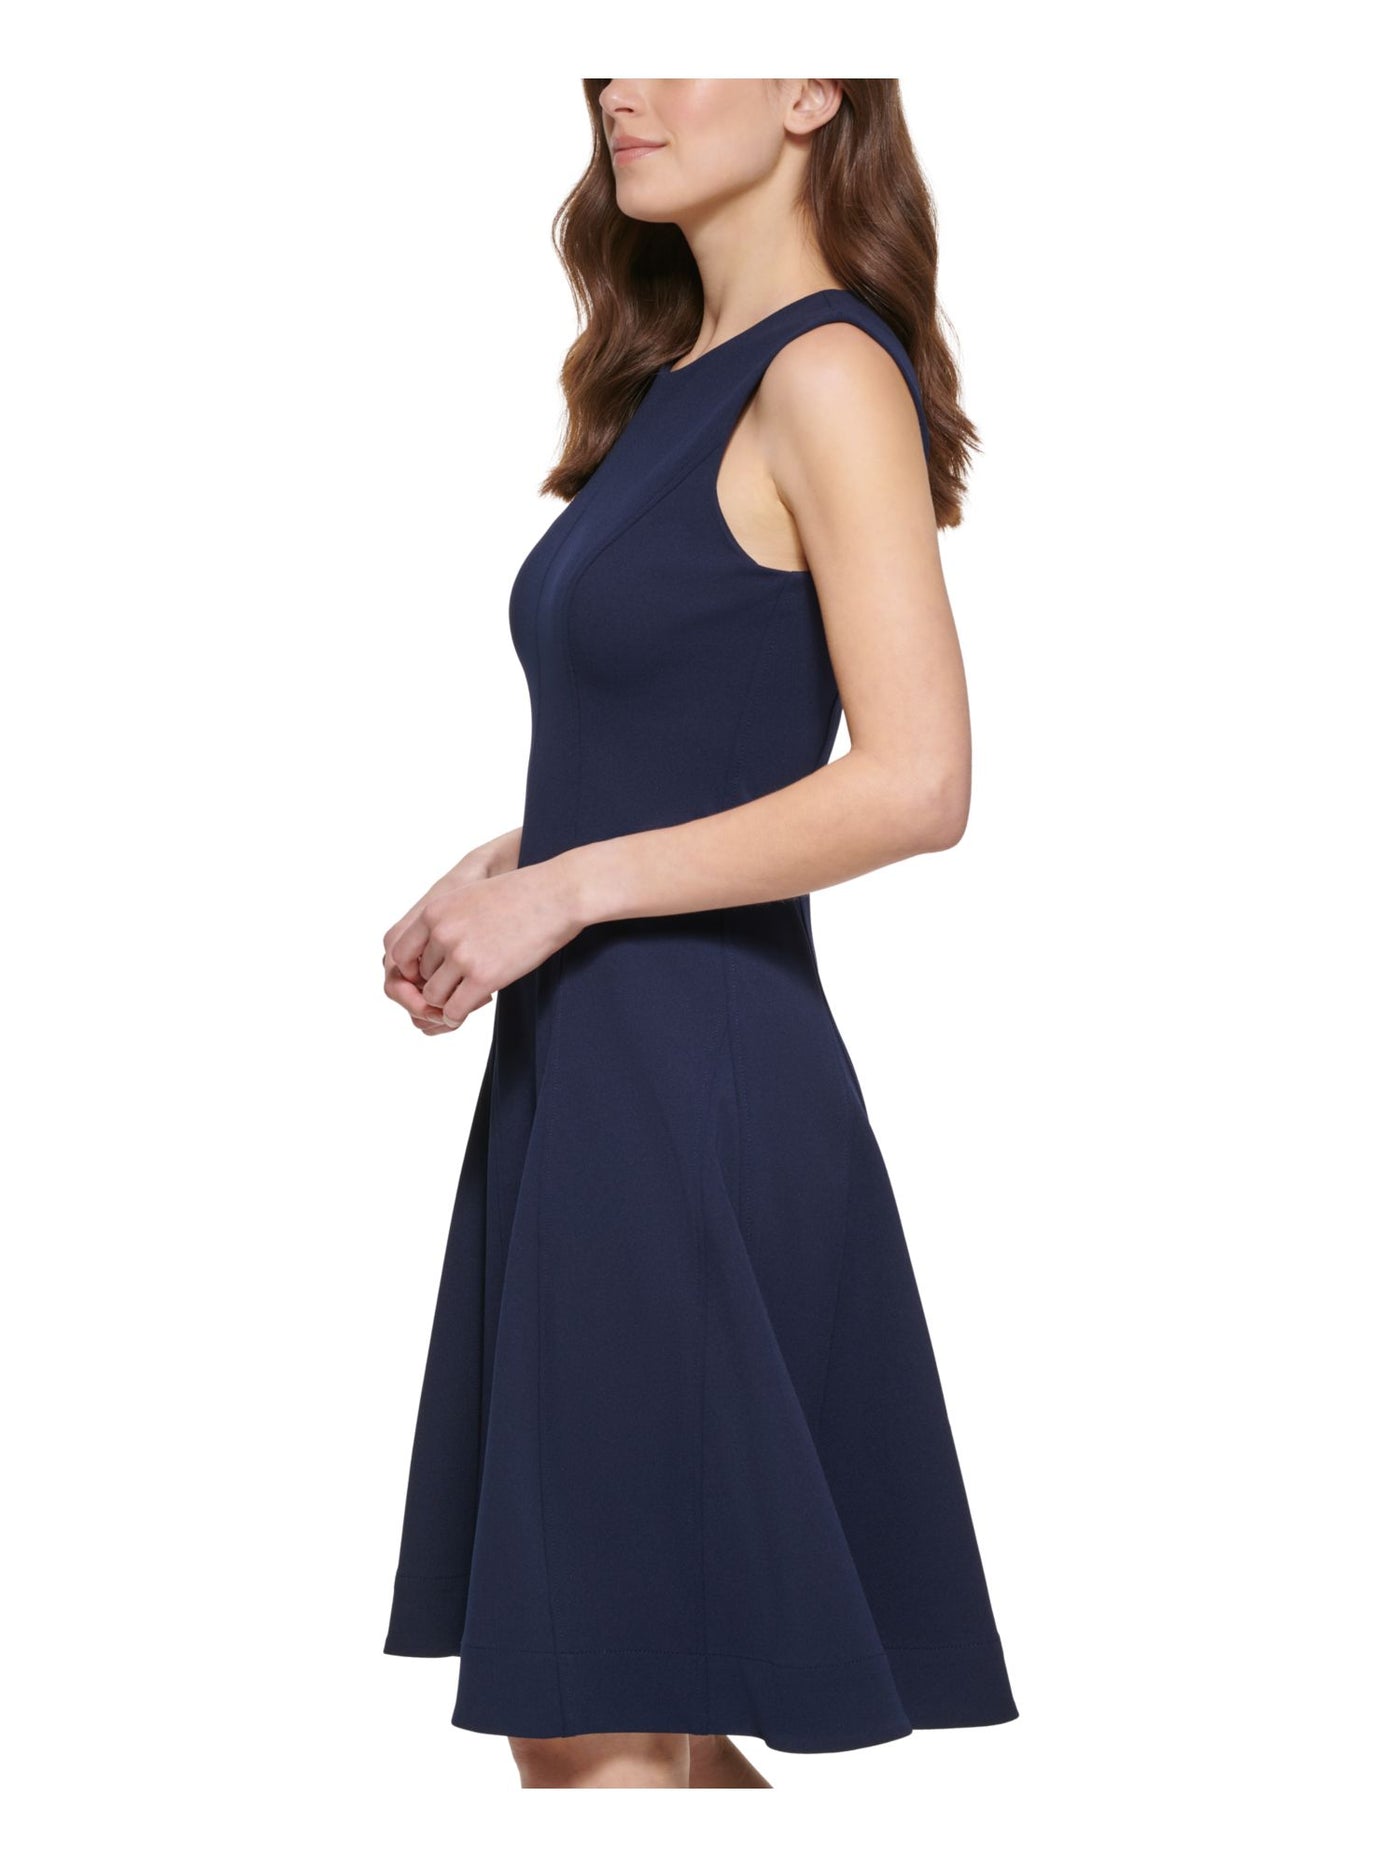 CALVIN KLEIN Womens Navy Zippered Textured Sleeveless Jewel Neck Above The Knee Wear To Work Fit + Flare Dress 2